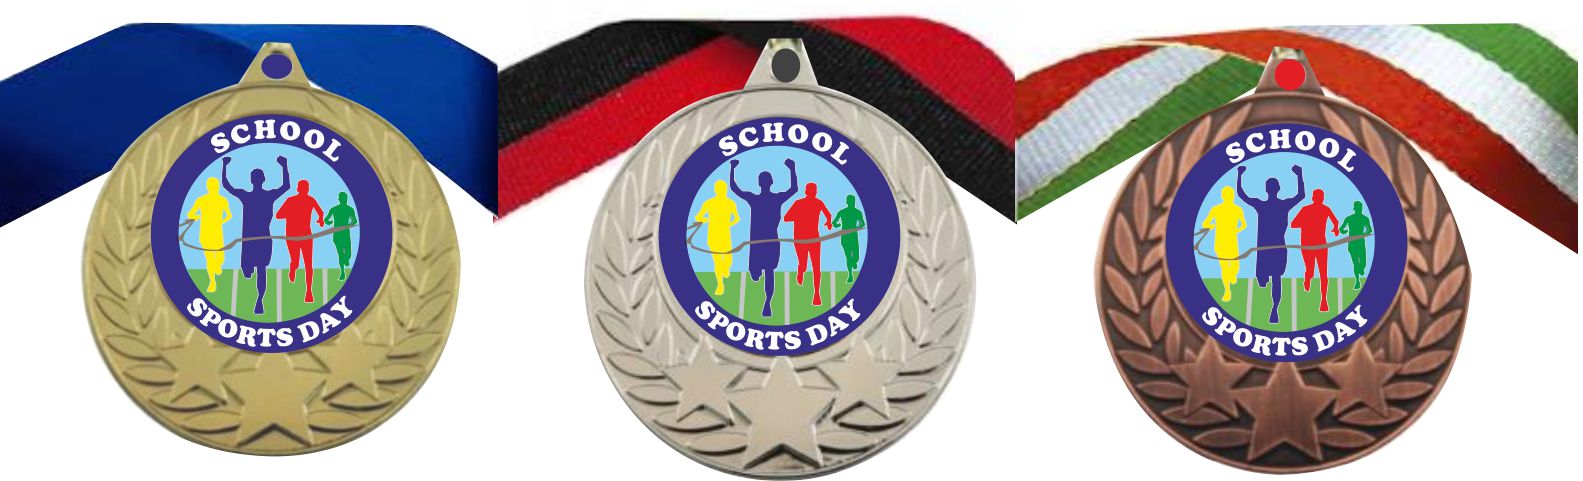 BESPORTBLE 6Pcs Gold Silver Award Medals with Ribbon Winner Medals Gold Silver Competitions Prizes for Kids School Sports Meeting Sports Event 